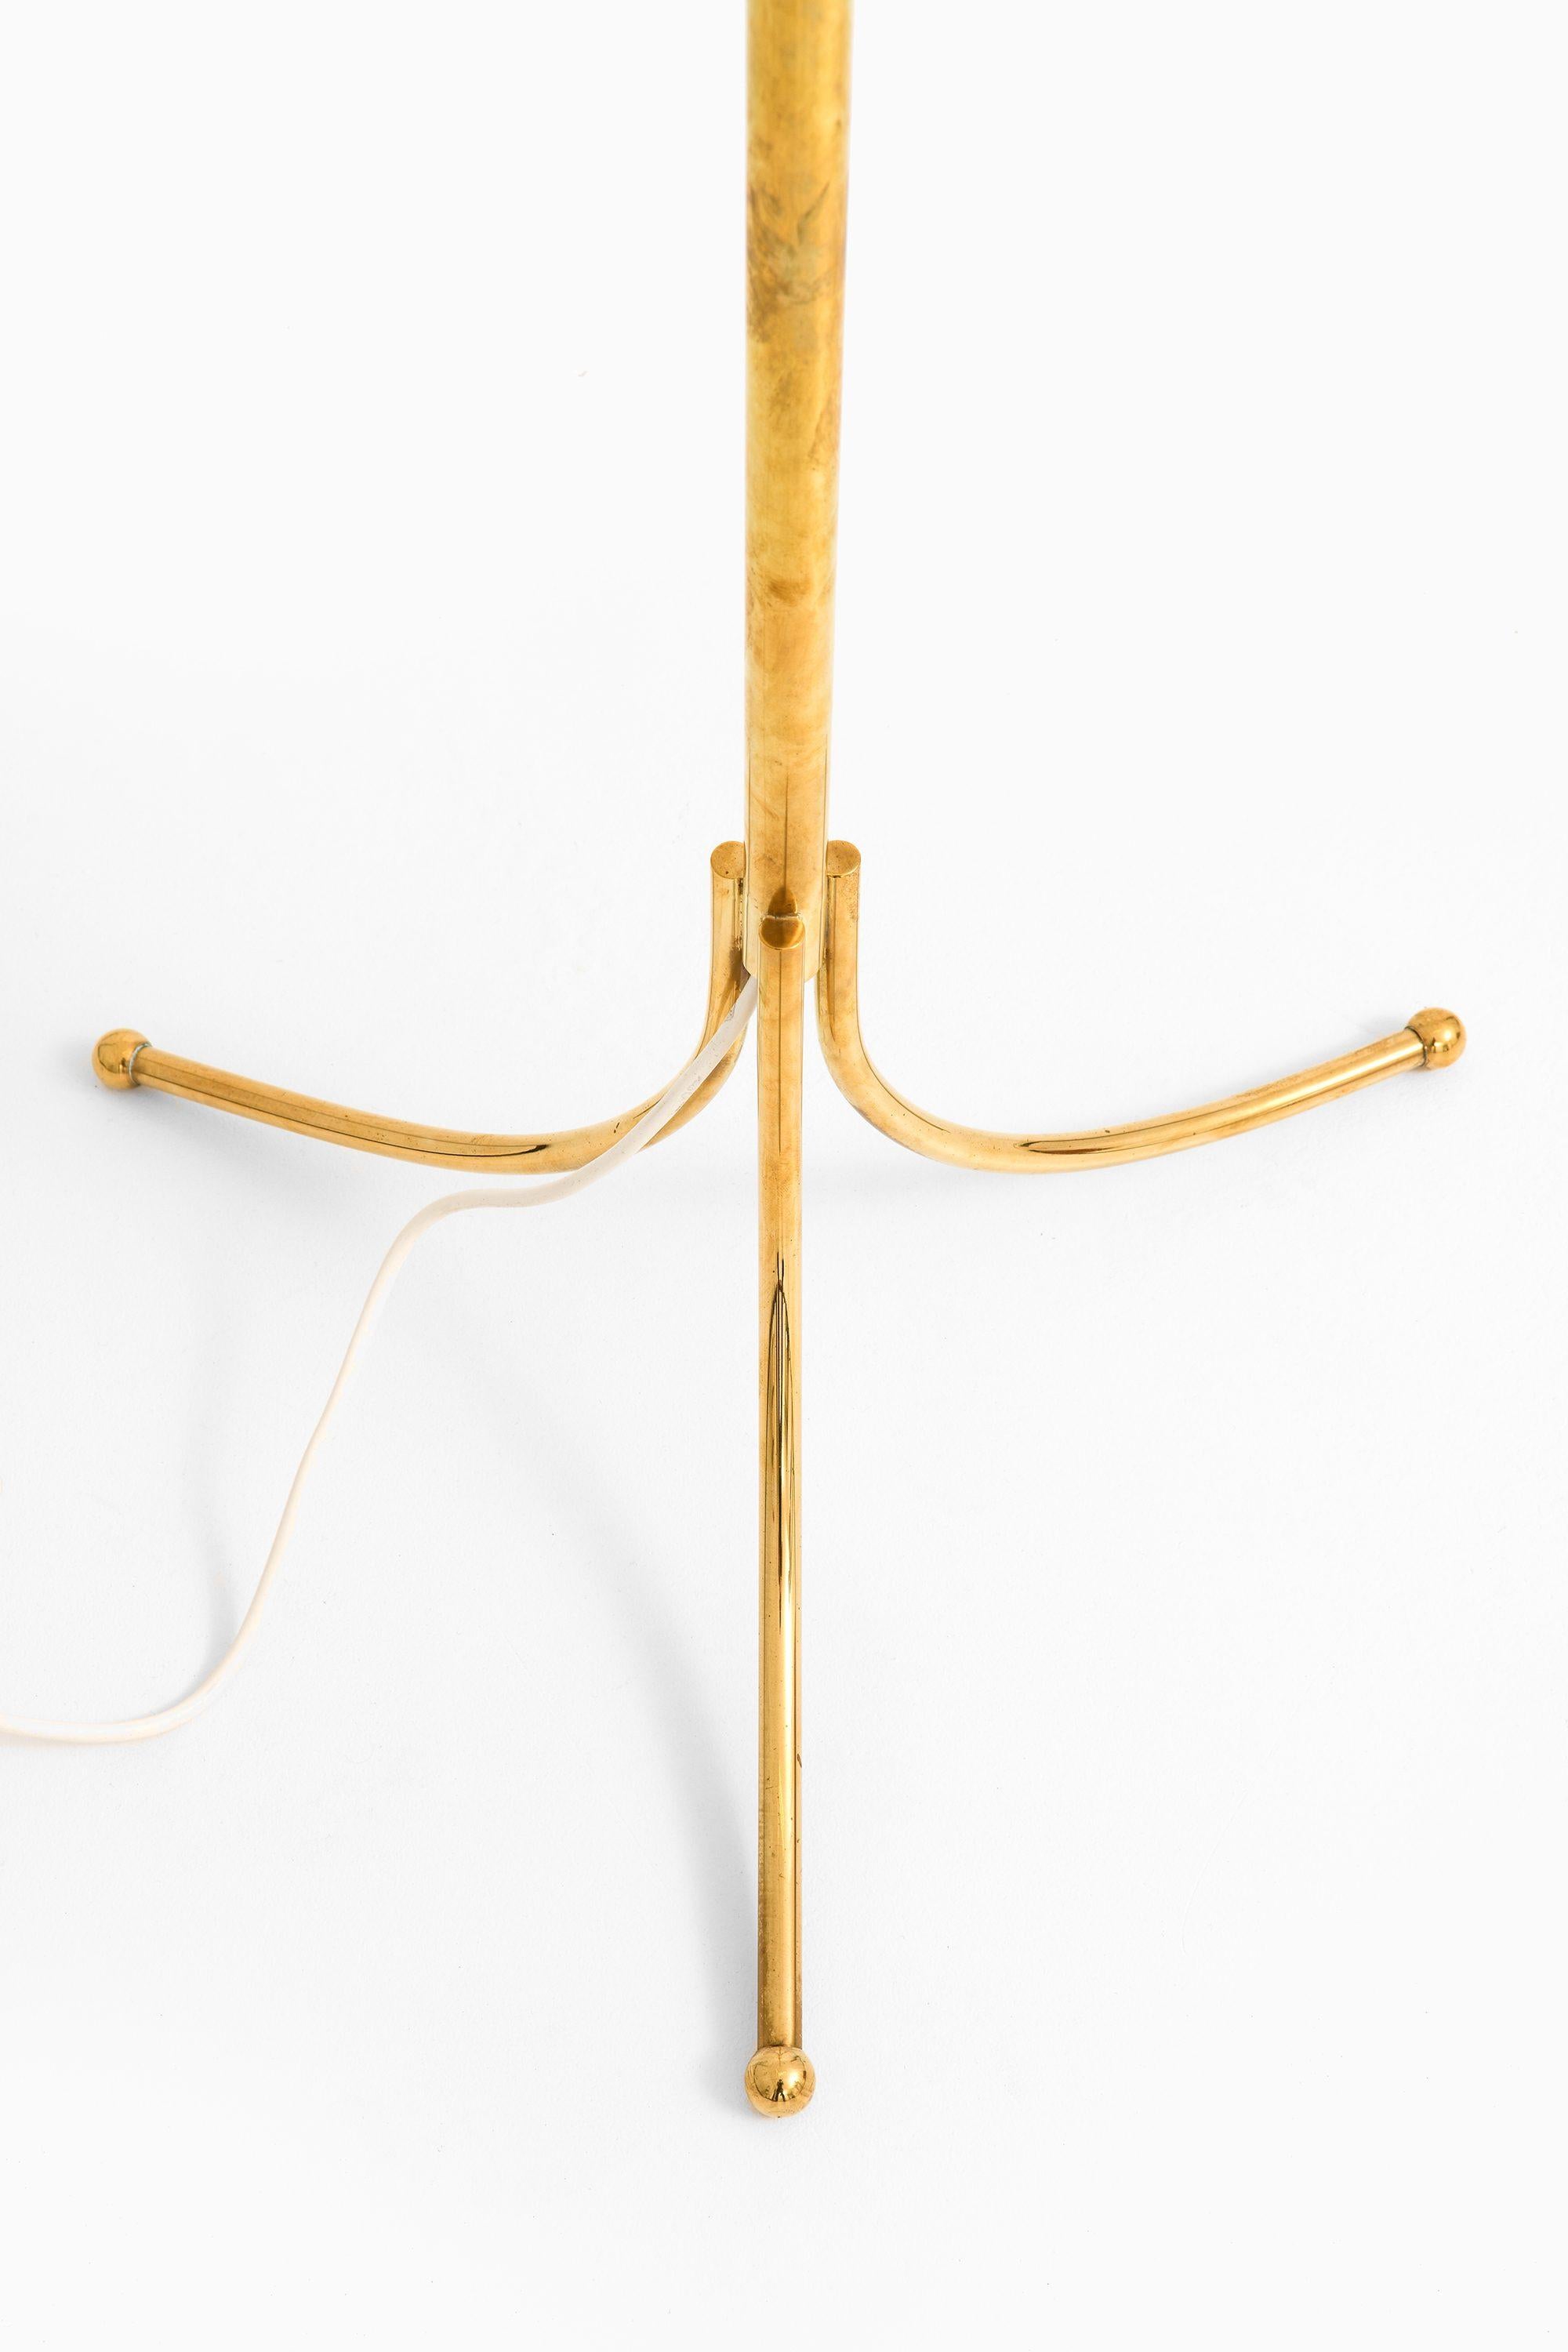 Floor Lamp in Brass By Josef Frank, 1950's In Good Condition For Sale In Limhamn, Skåne län